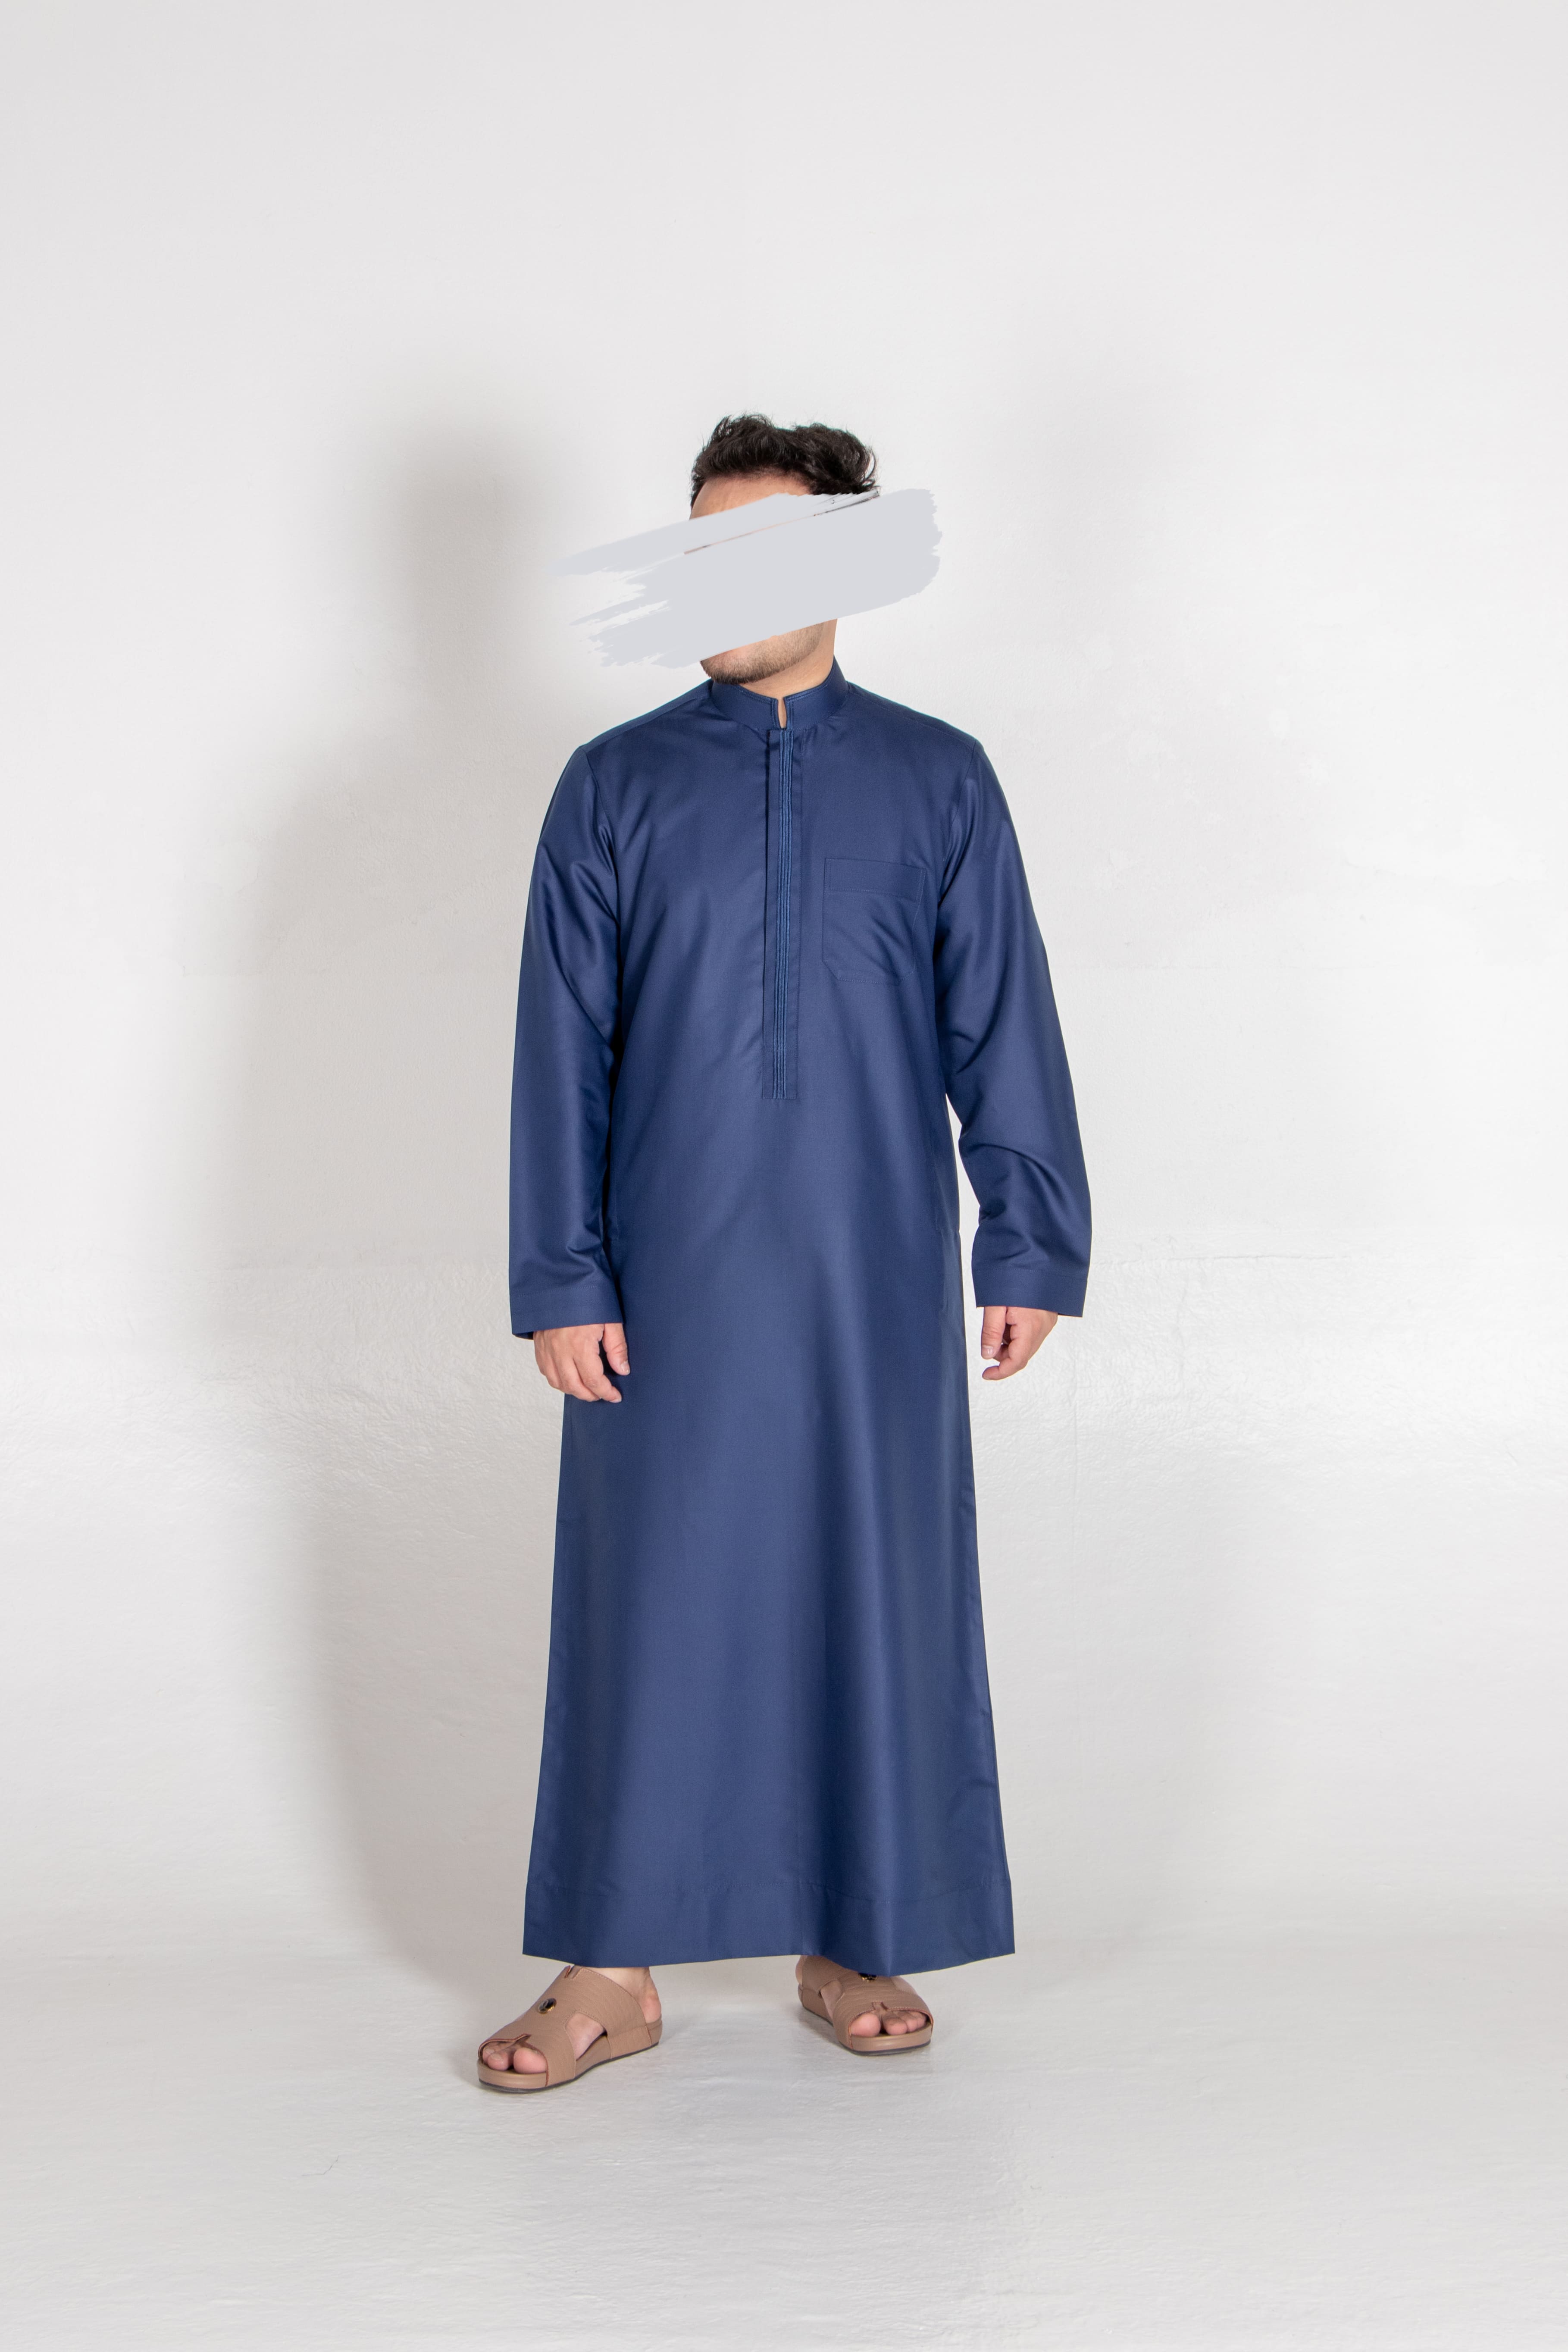 Lined Navy Blue Thobe - Exclusive Thobe - Muslim Lifestyle Store